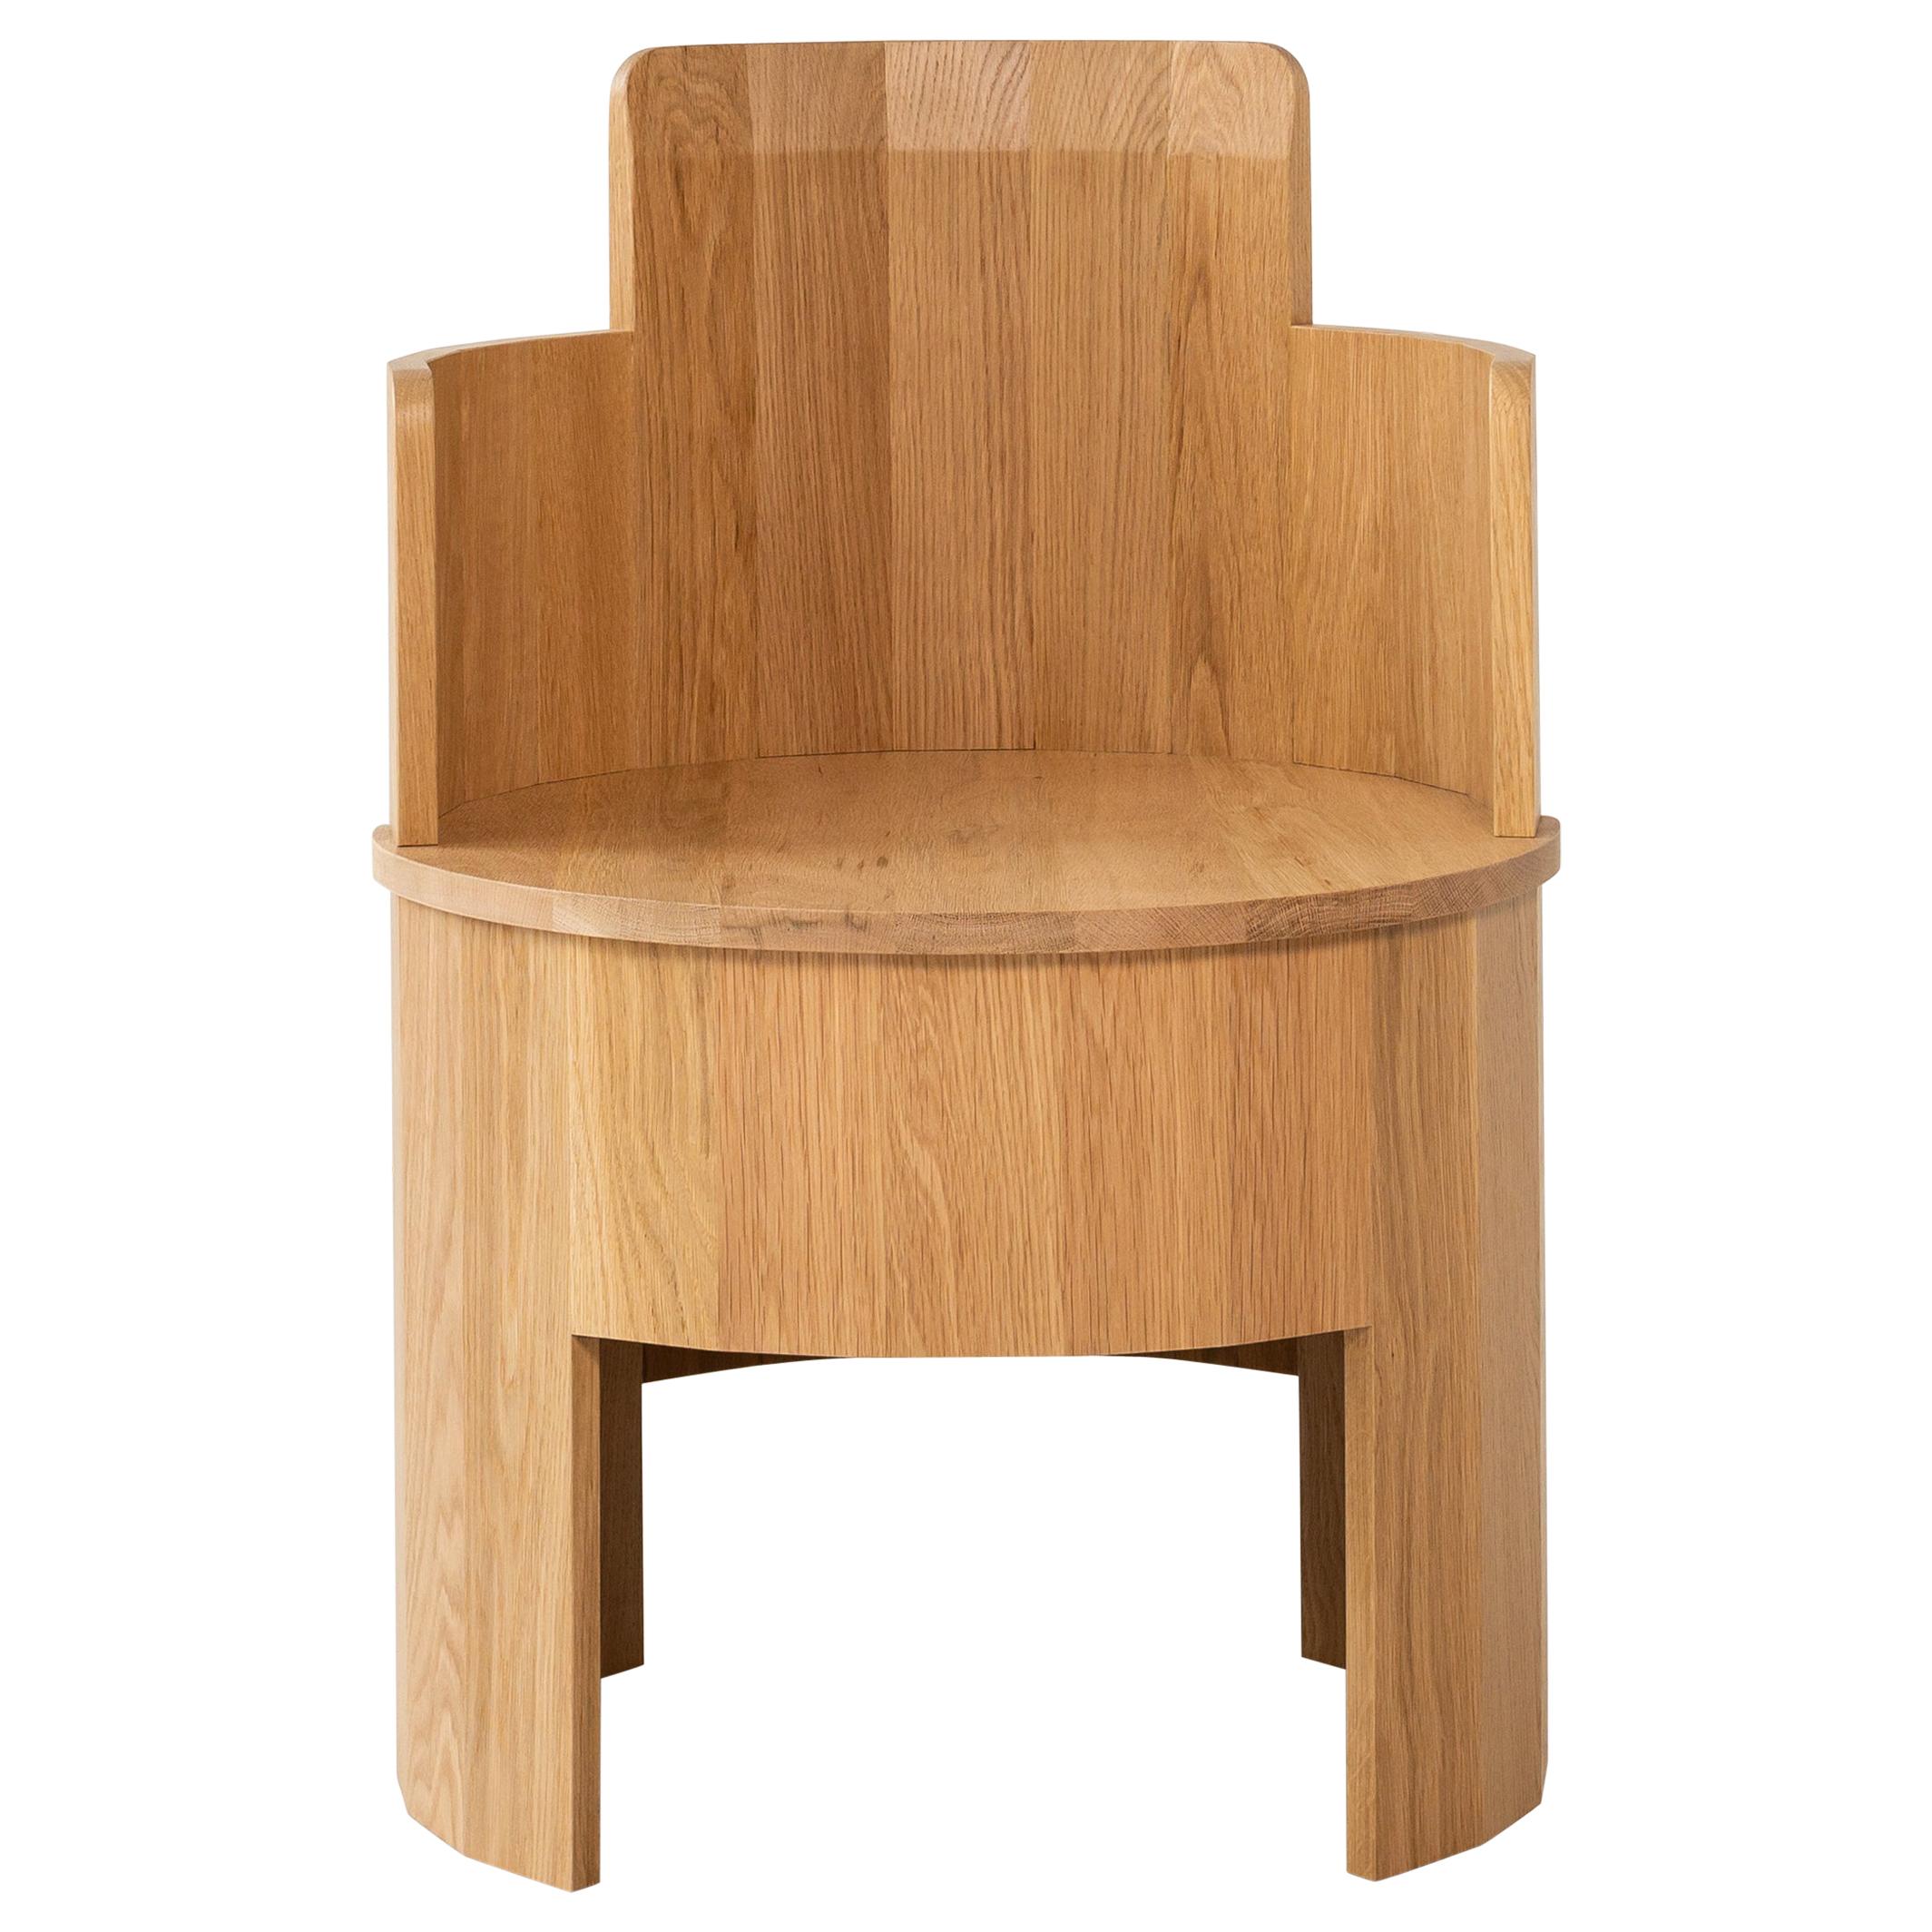 Contemporary White Oak Wood Cooperage Chair by Fort Standard, In Stock